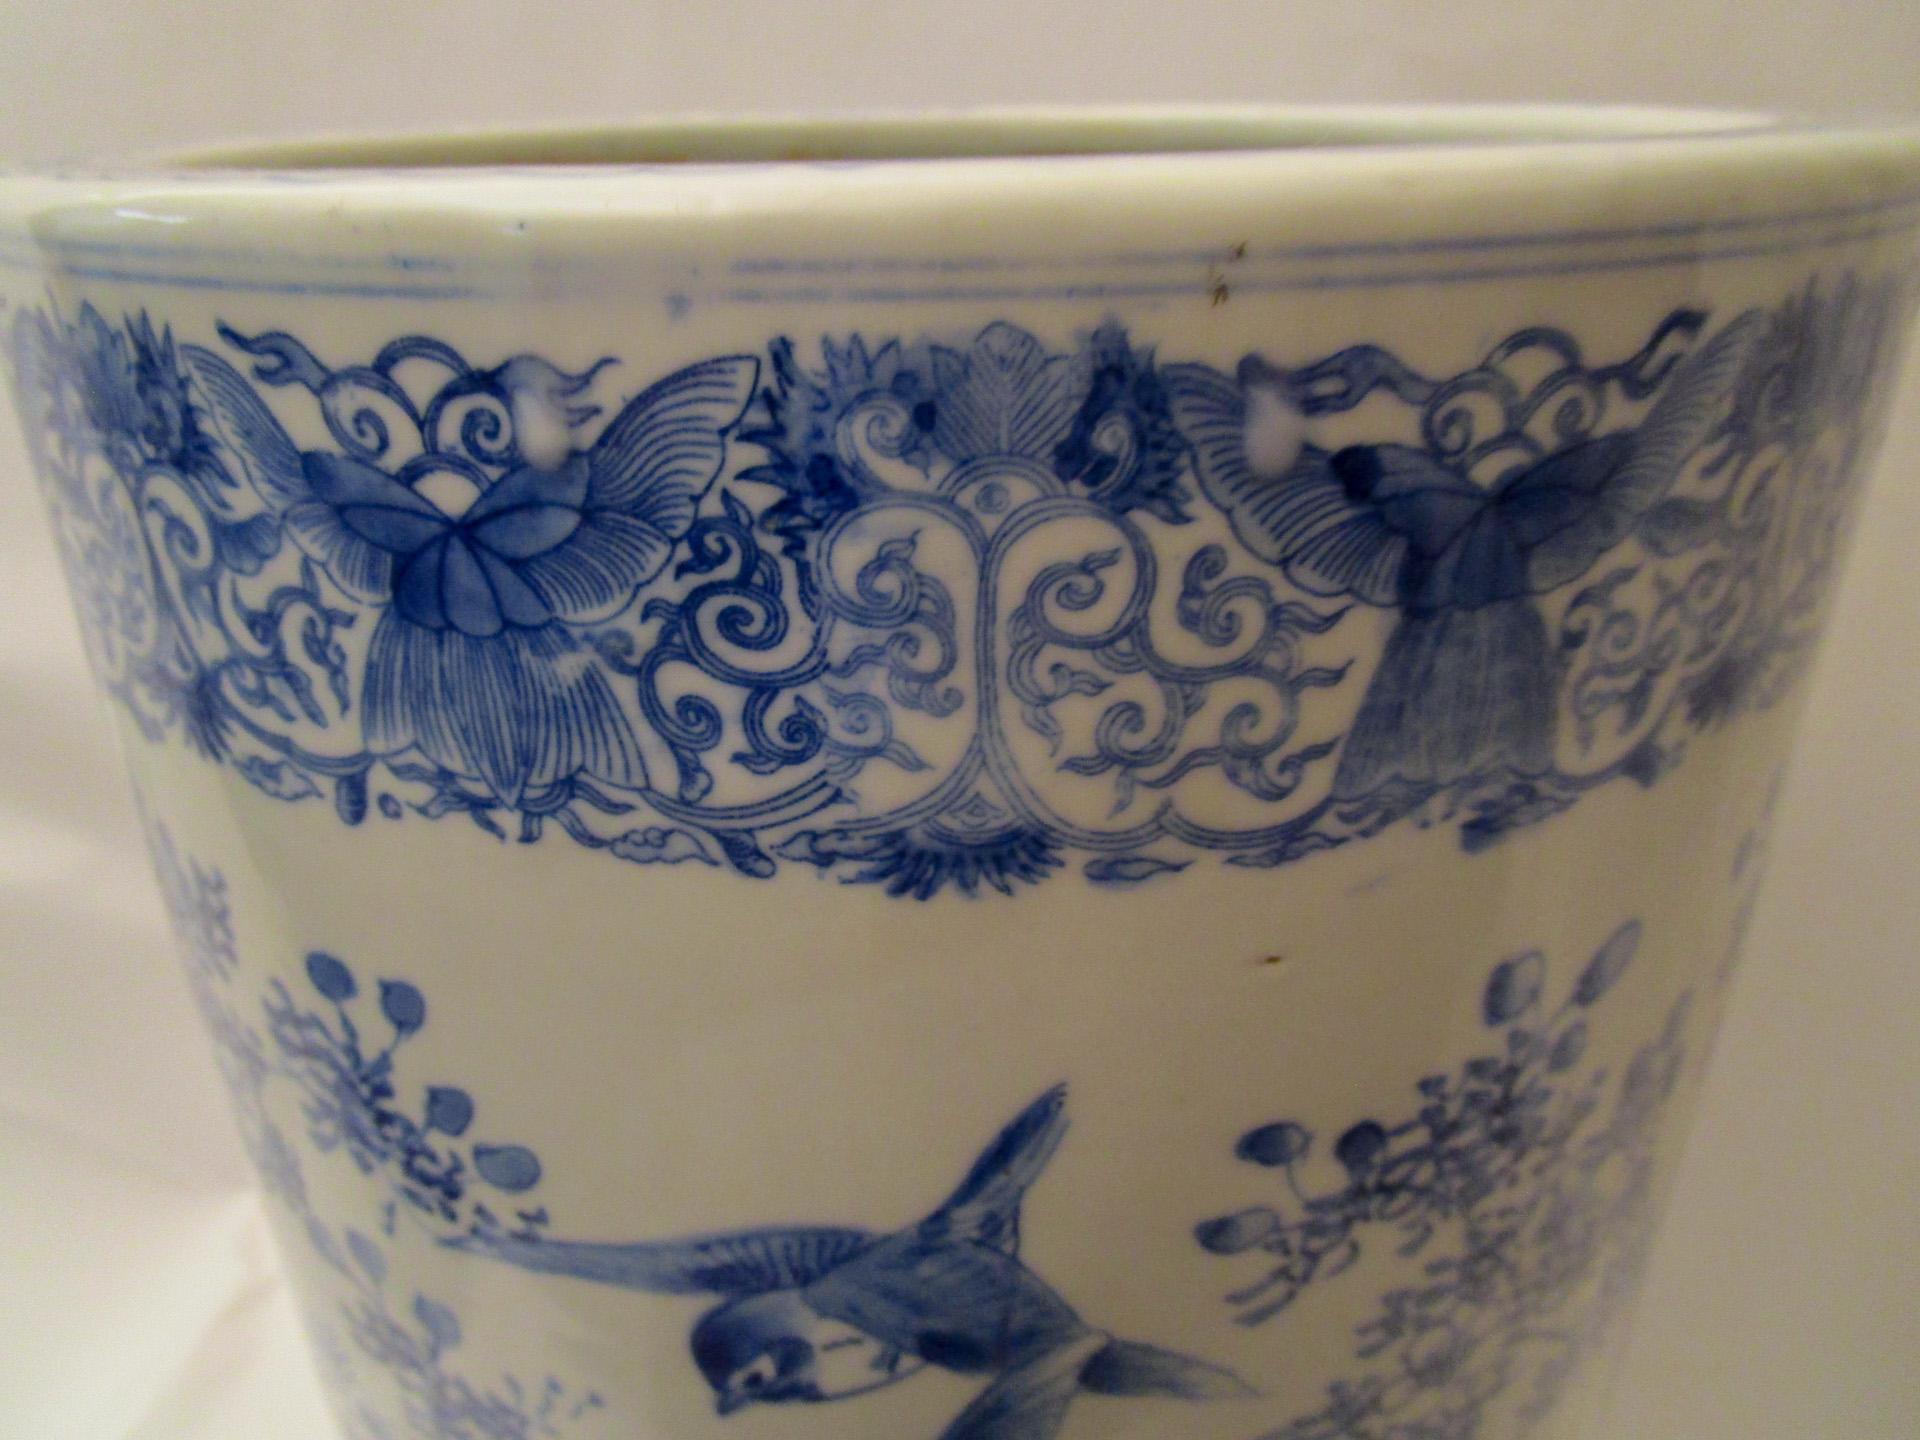 Decorative blue and white porcelain Chinese export umbrella stand that could be also used as a vase. Lovely detail including birds, flowers, scroll designs and a modified Greek Key border.